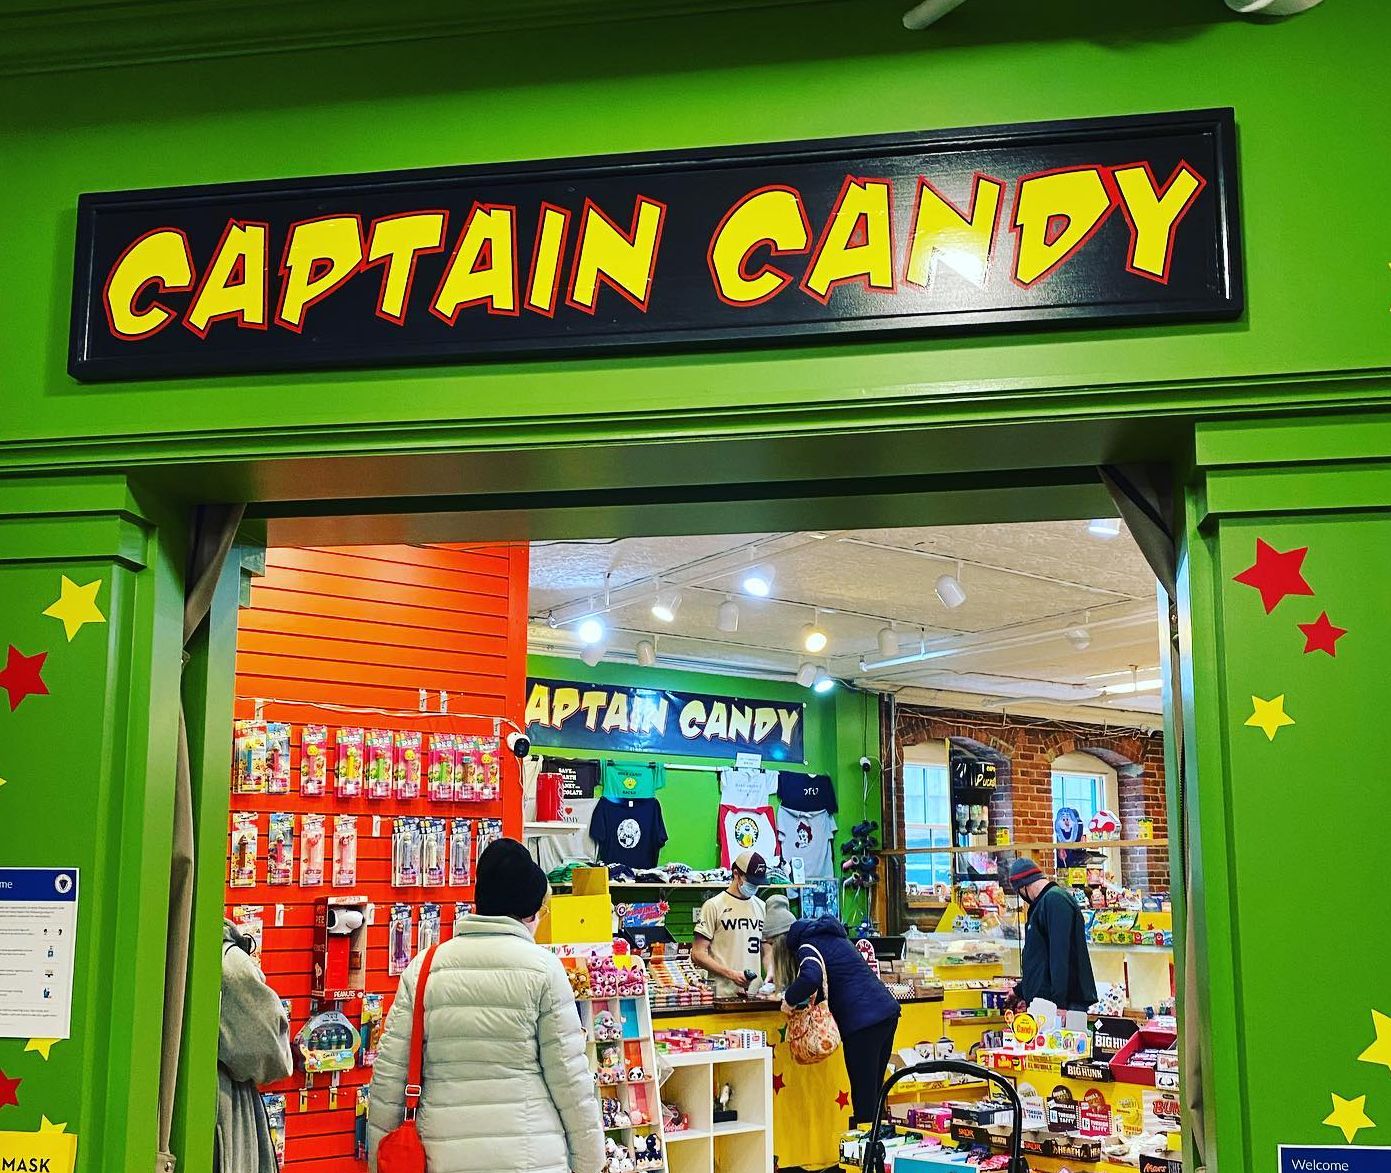 The go-to place for nostalgic candy -- Check out Captain Candy in Thornes!